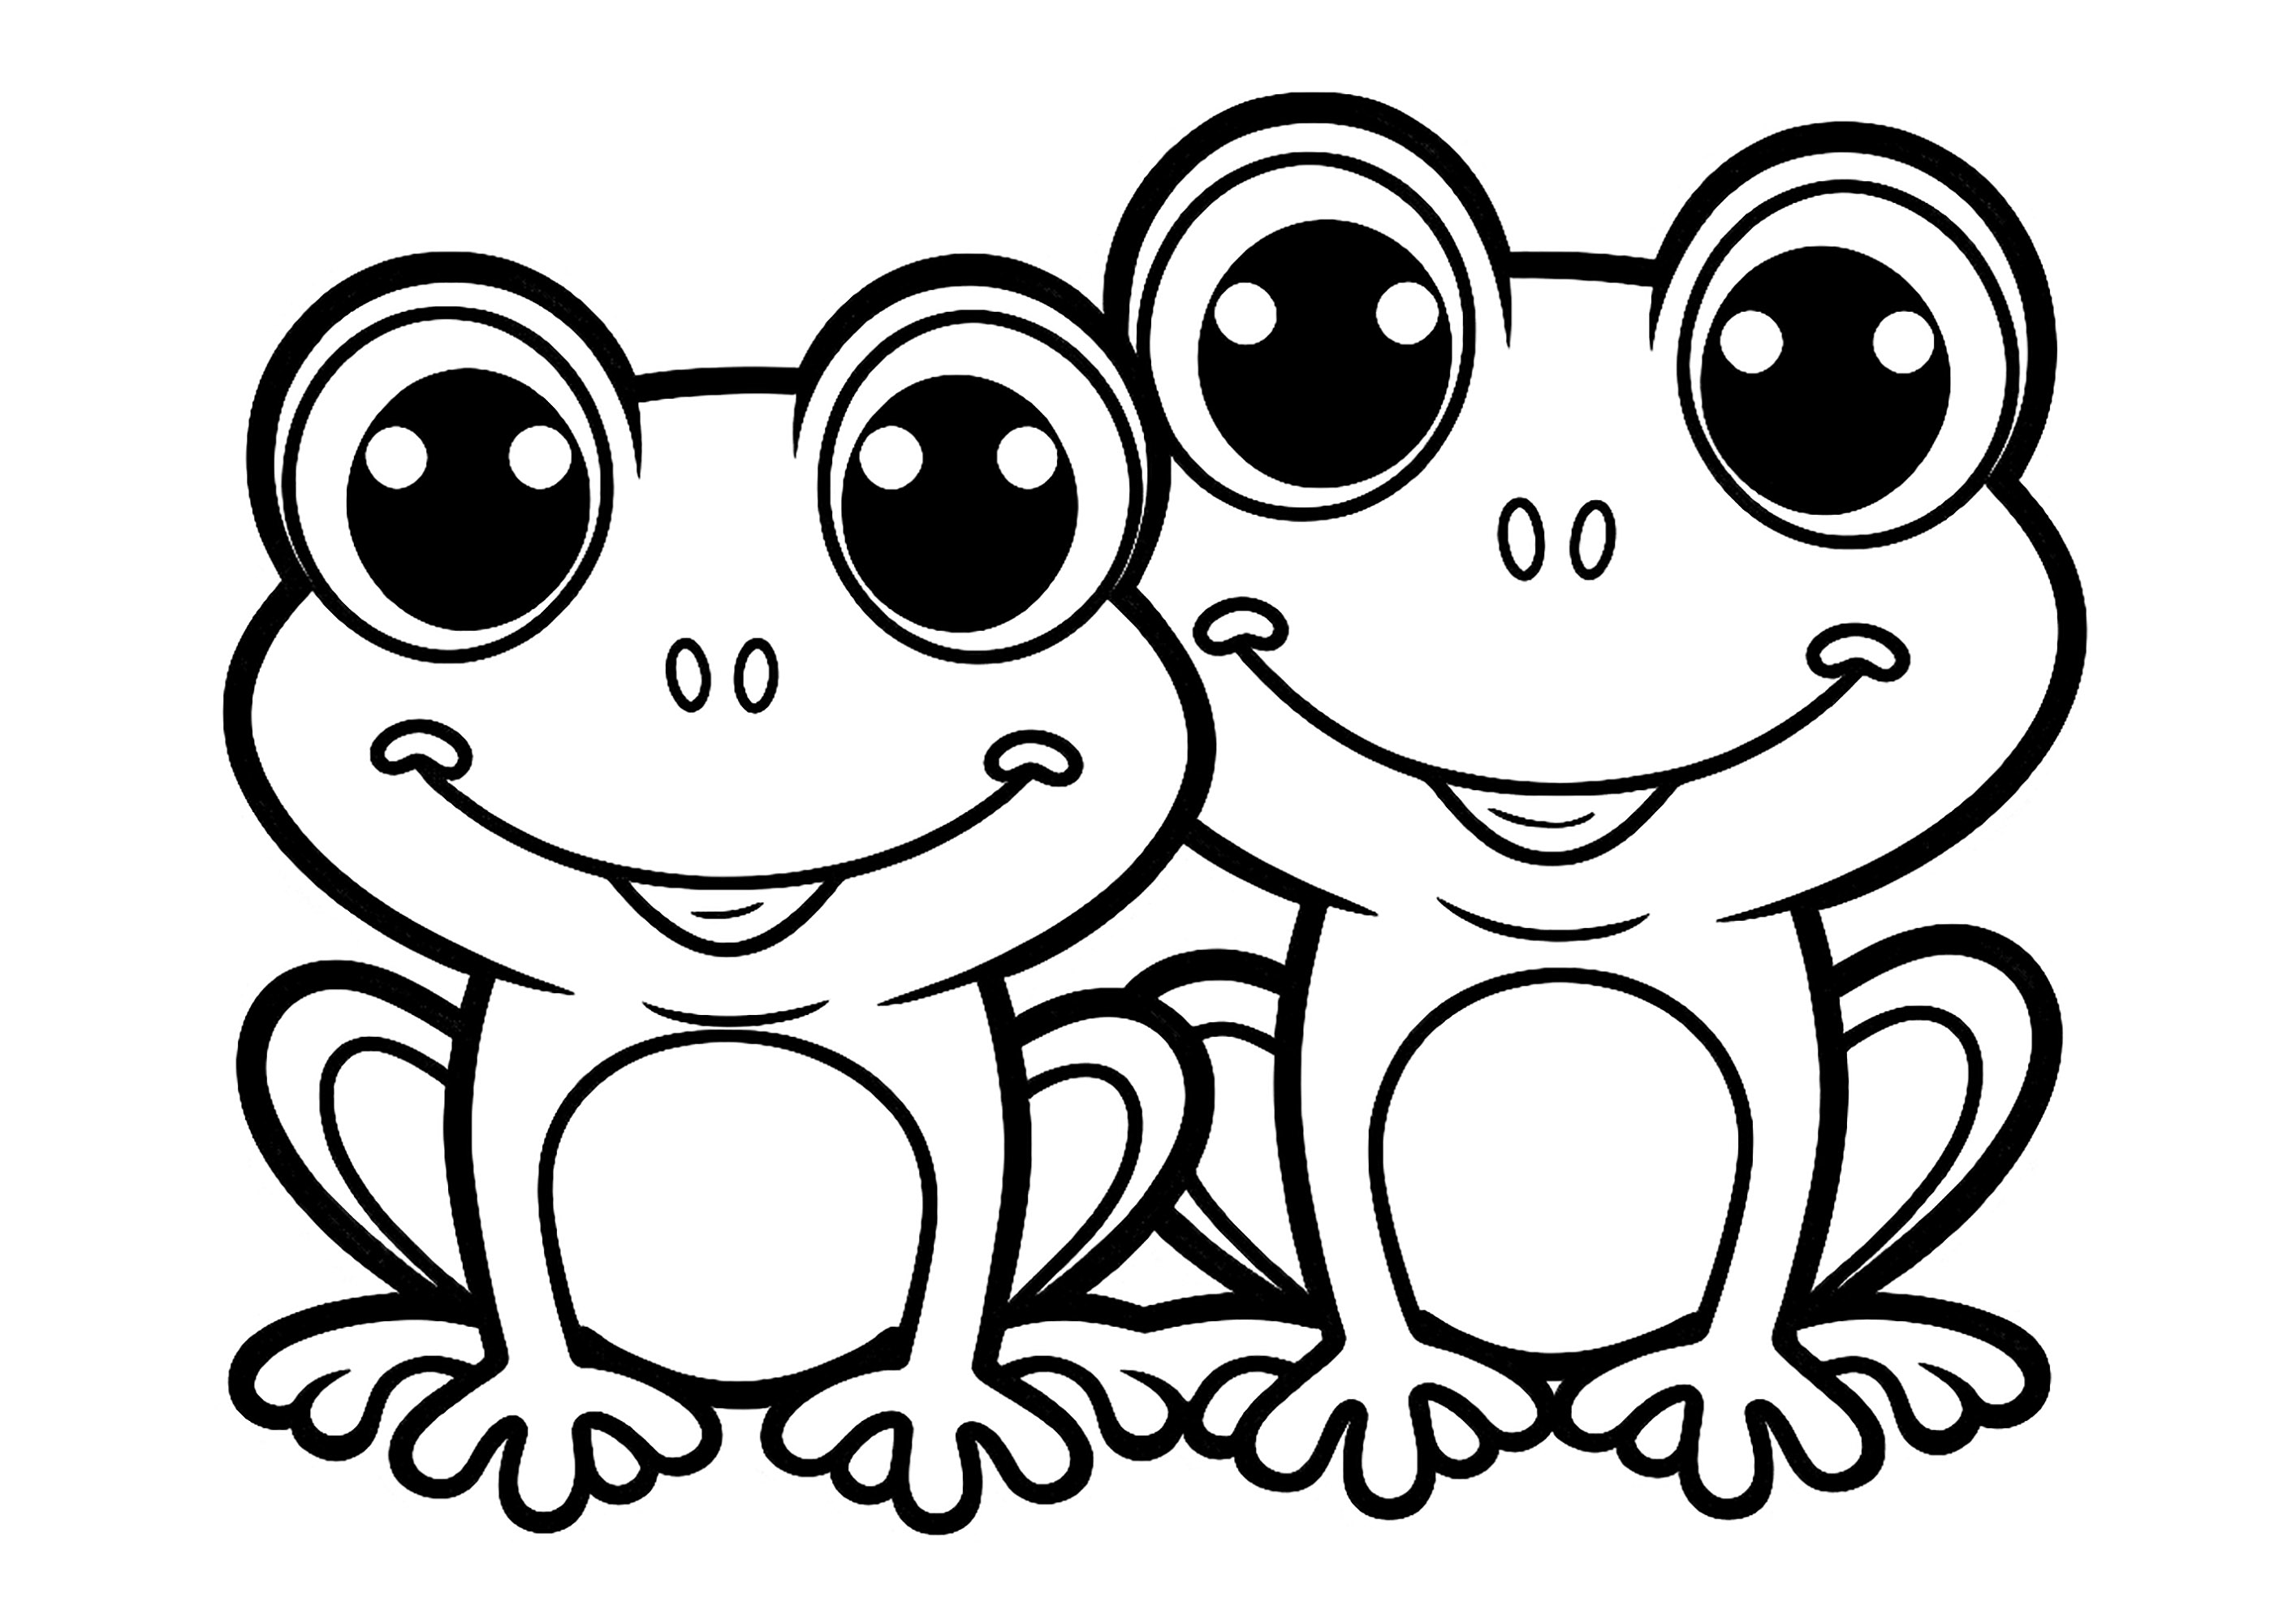 Printable Frogs coloring page to print and color for free